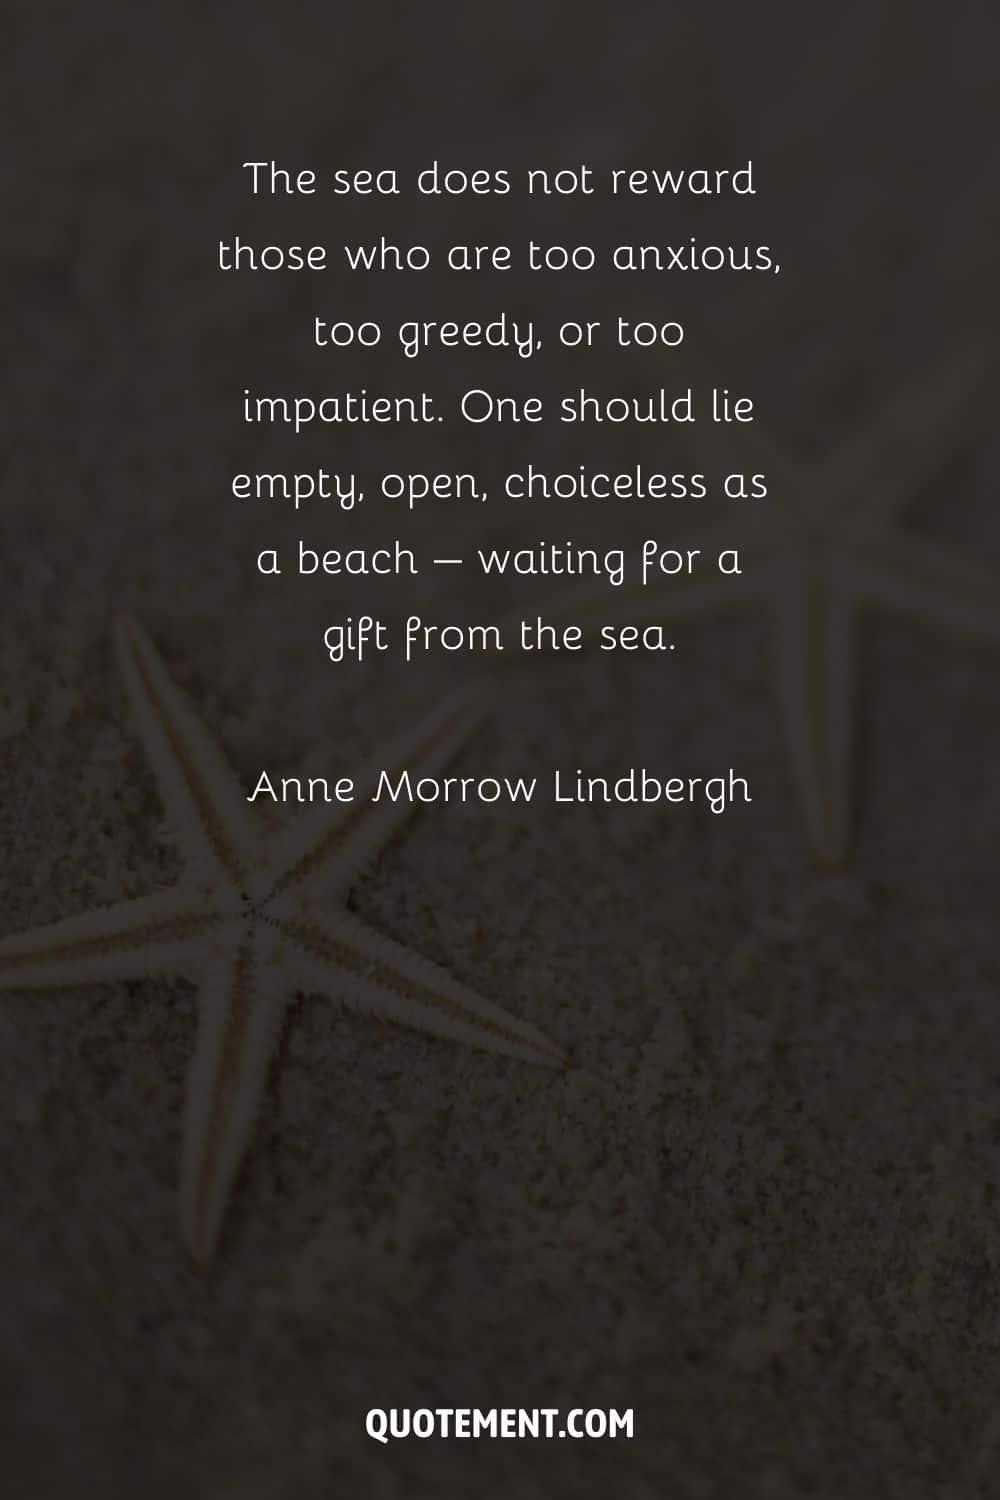 The sea does not reward those who are too anxious, too greedy, or too impatient. One should lie empty, open, choiceless as a beach